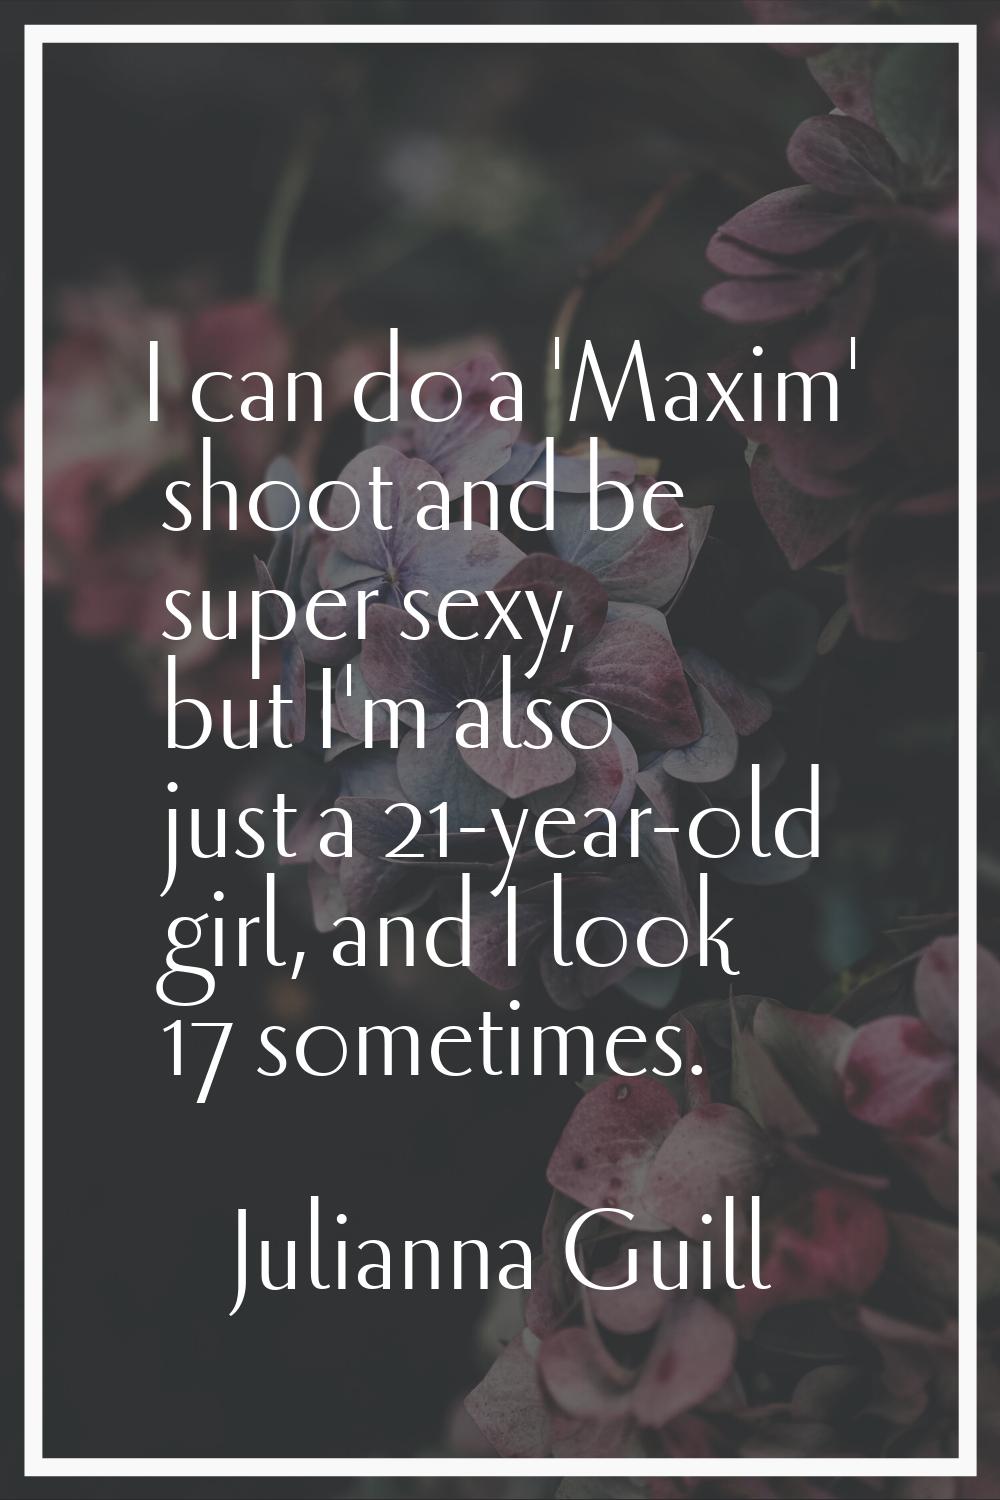 I can do a 'Maxim' shoot and be super sexy, but I'm also just a 21-year-old girl, and I look 17 som